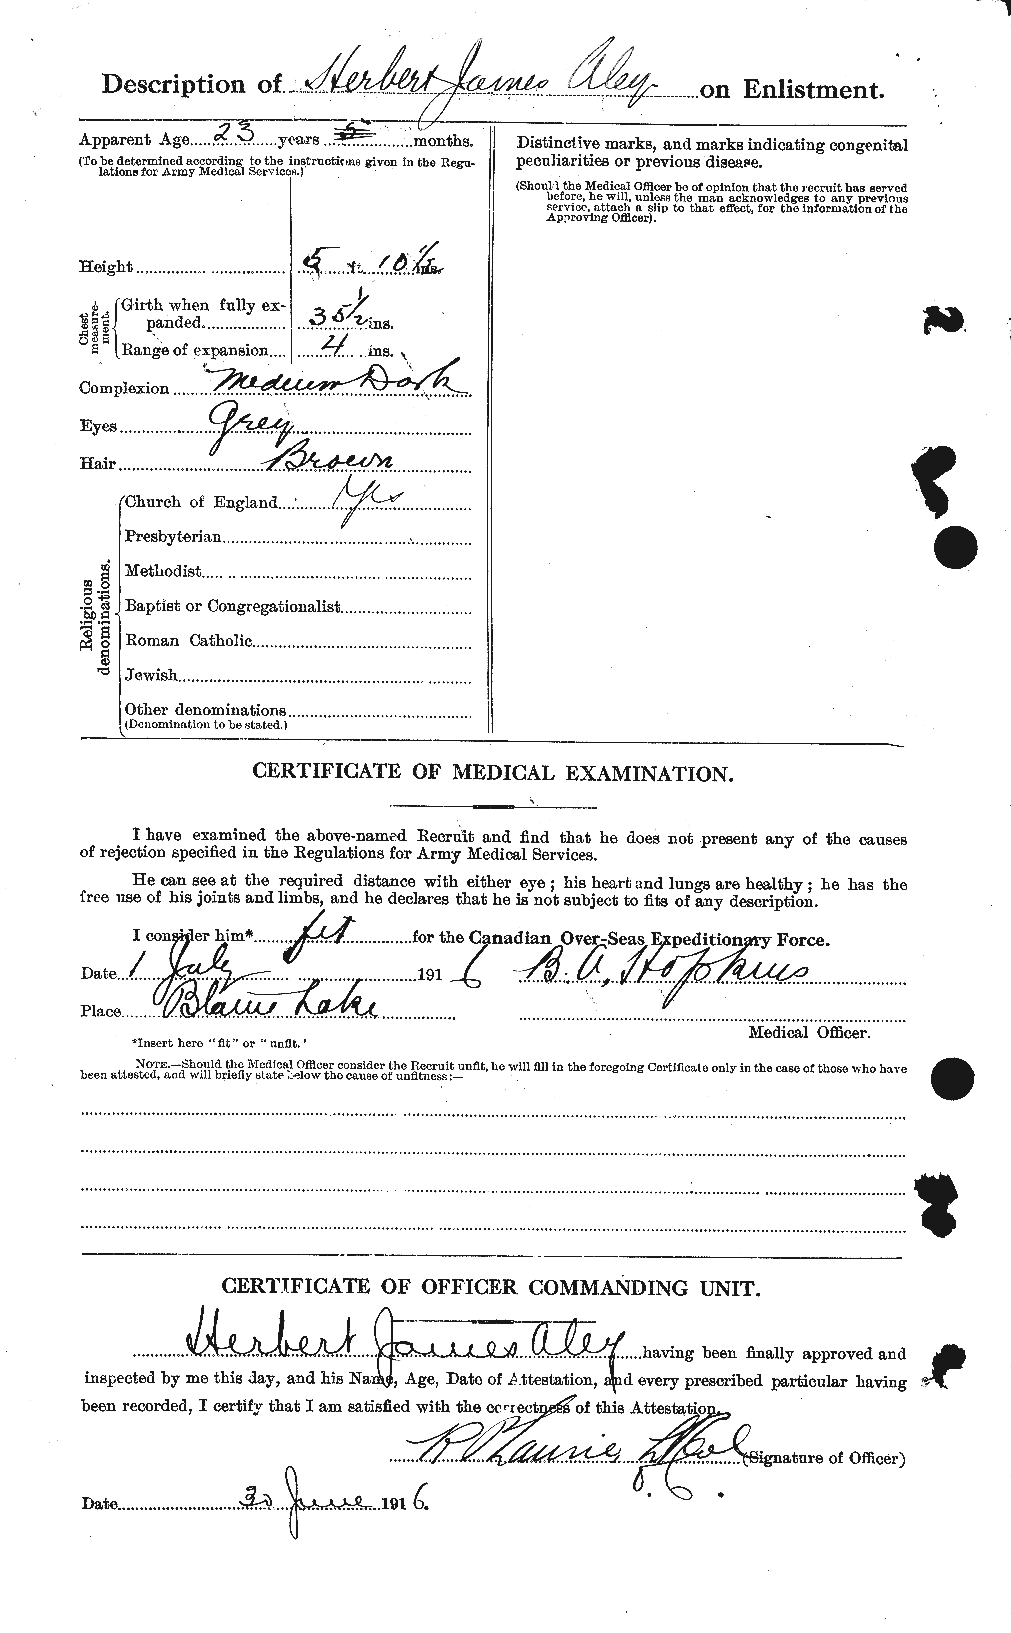 Personnel Records of the First World War - CEF 204464b